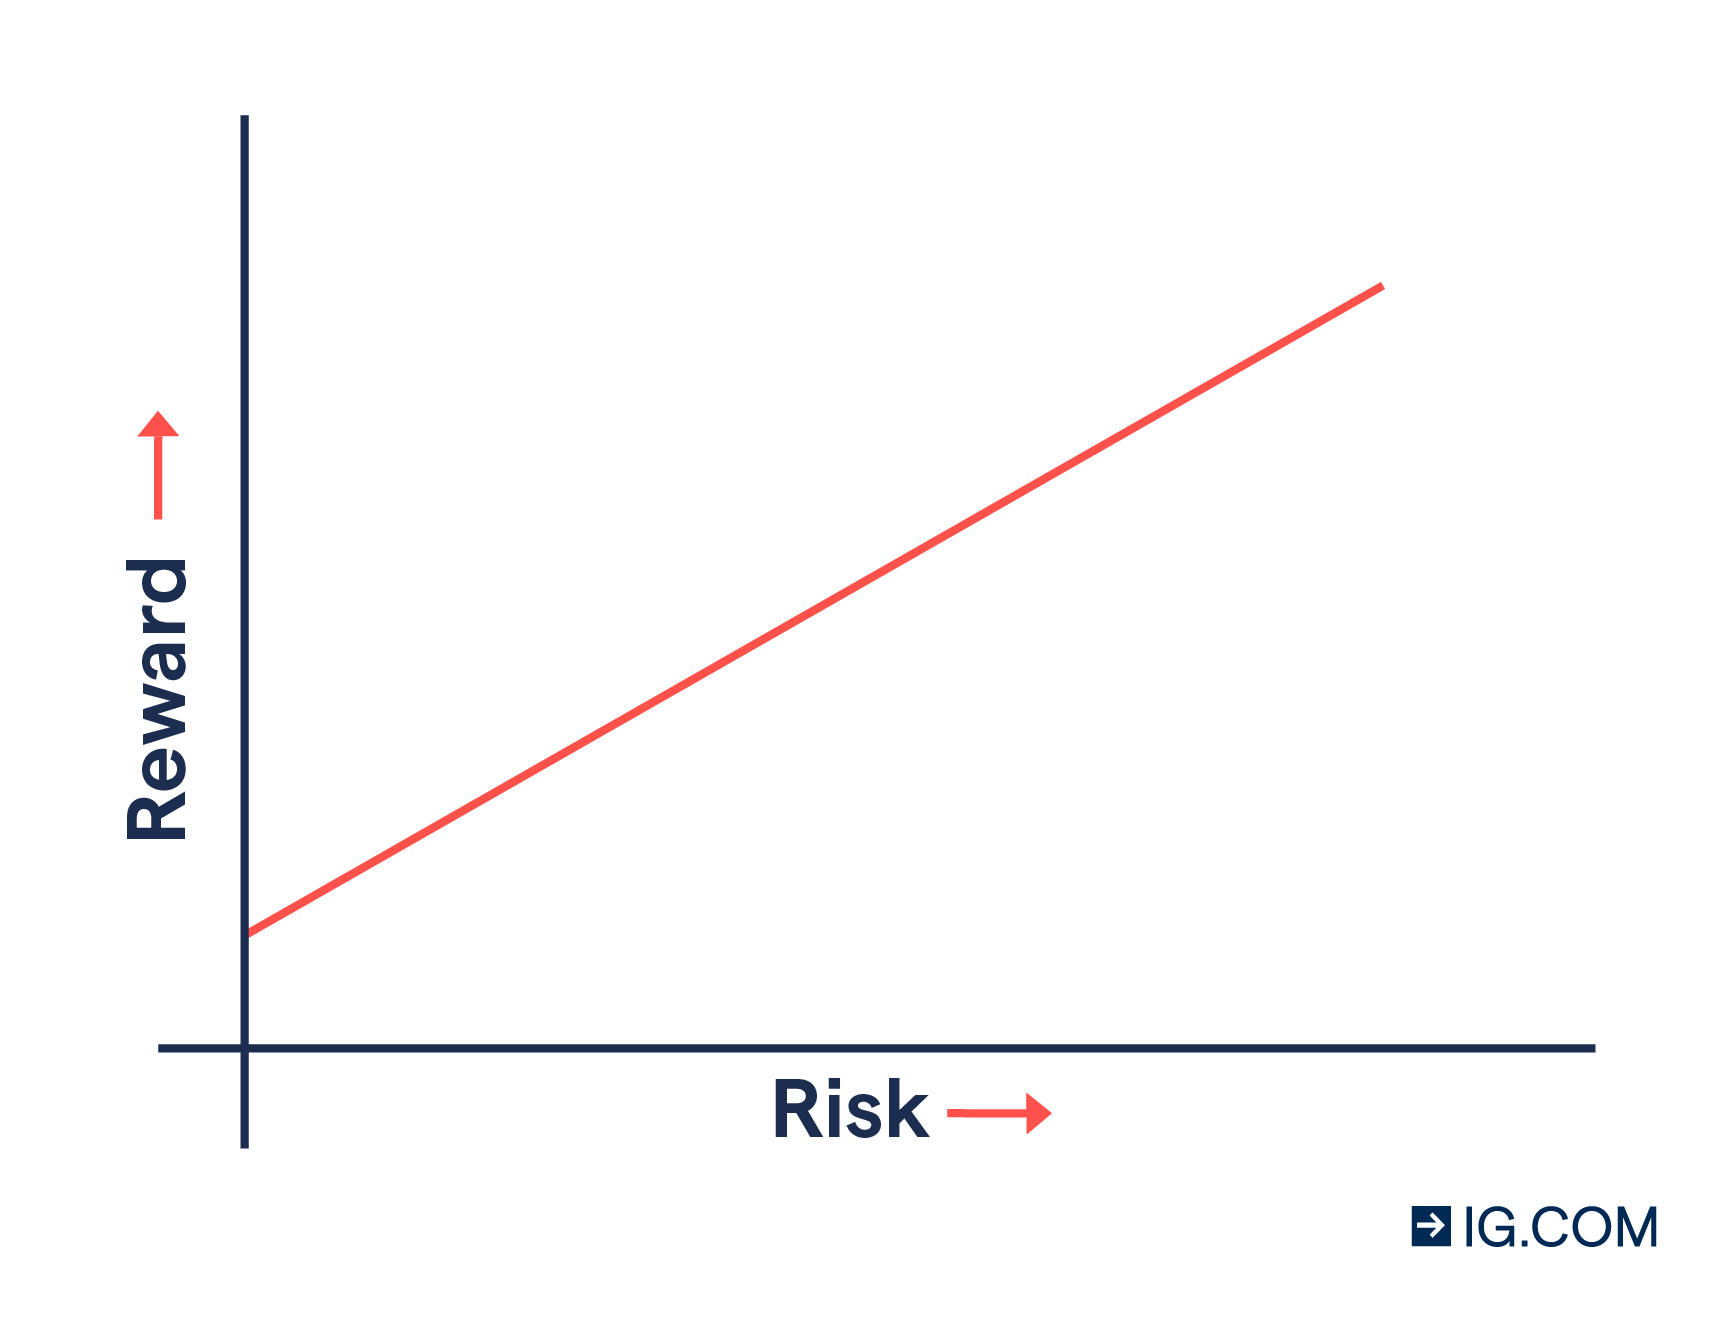 X axis shows risk and Y axis shows reward: as risk increases, so does reward